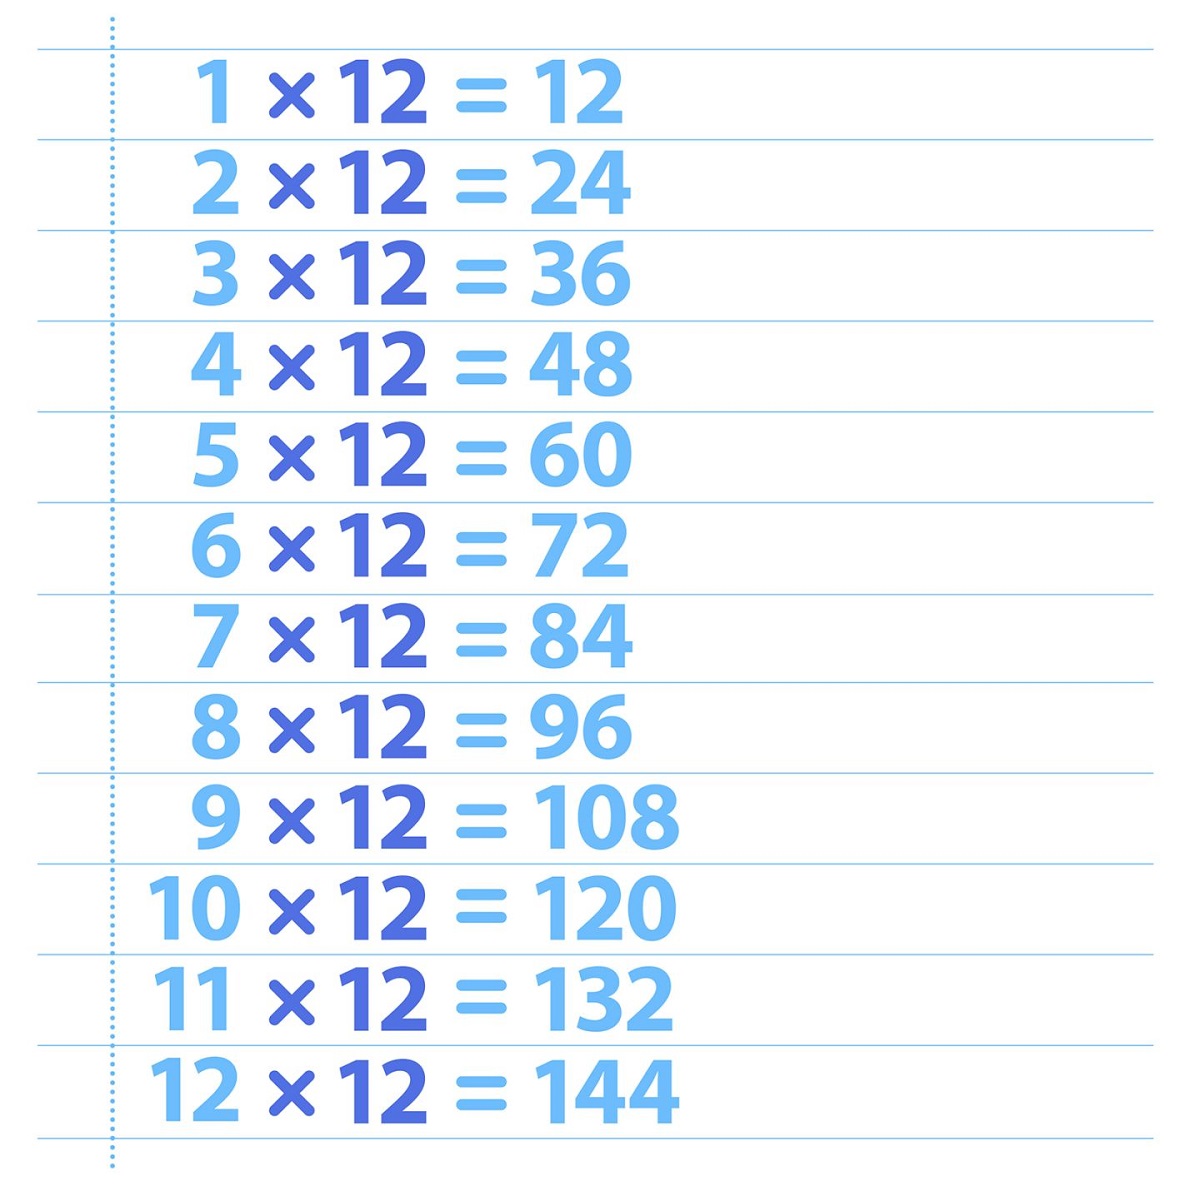 12 times table multiplication worksheets